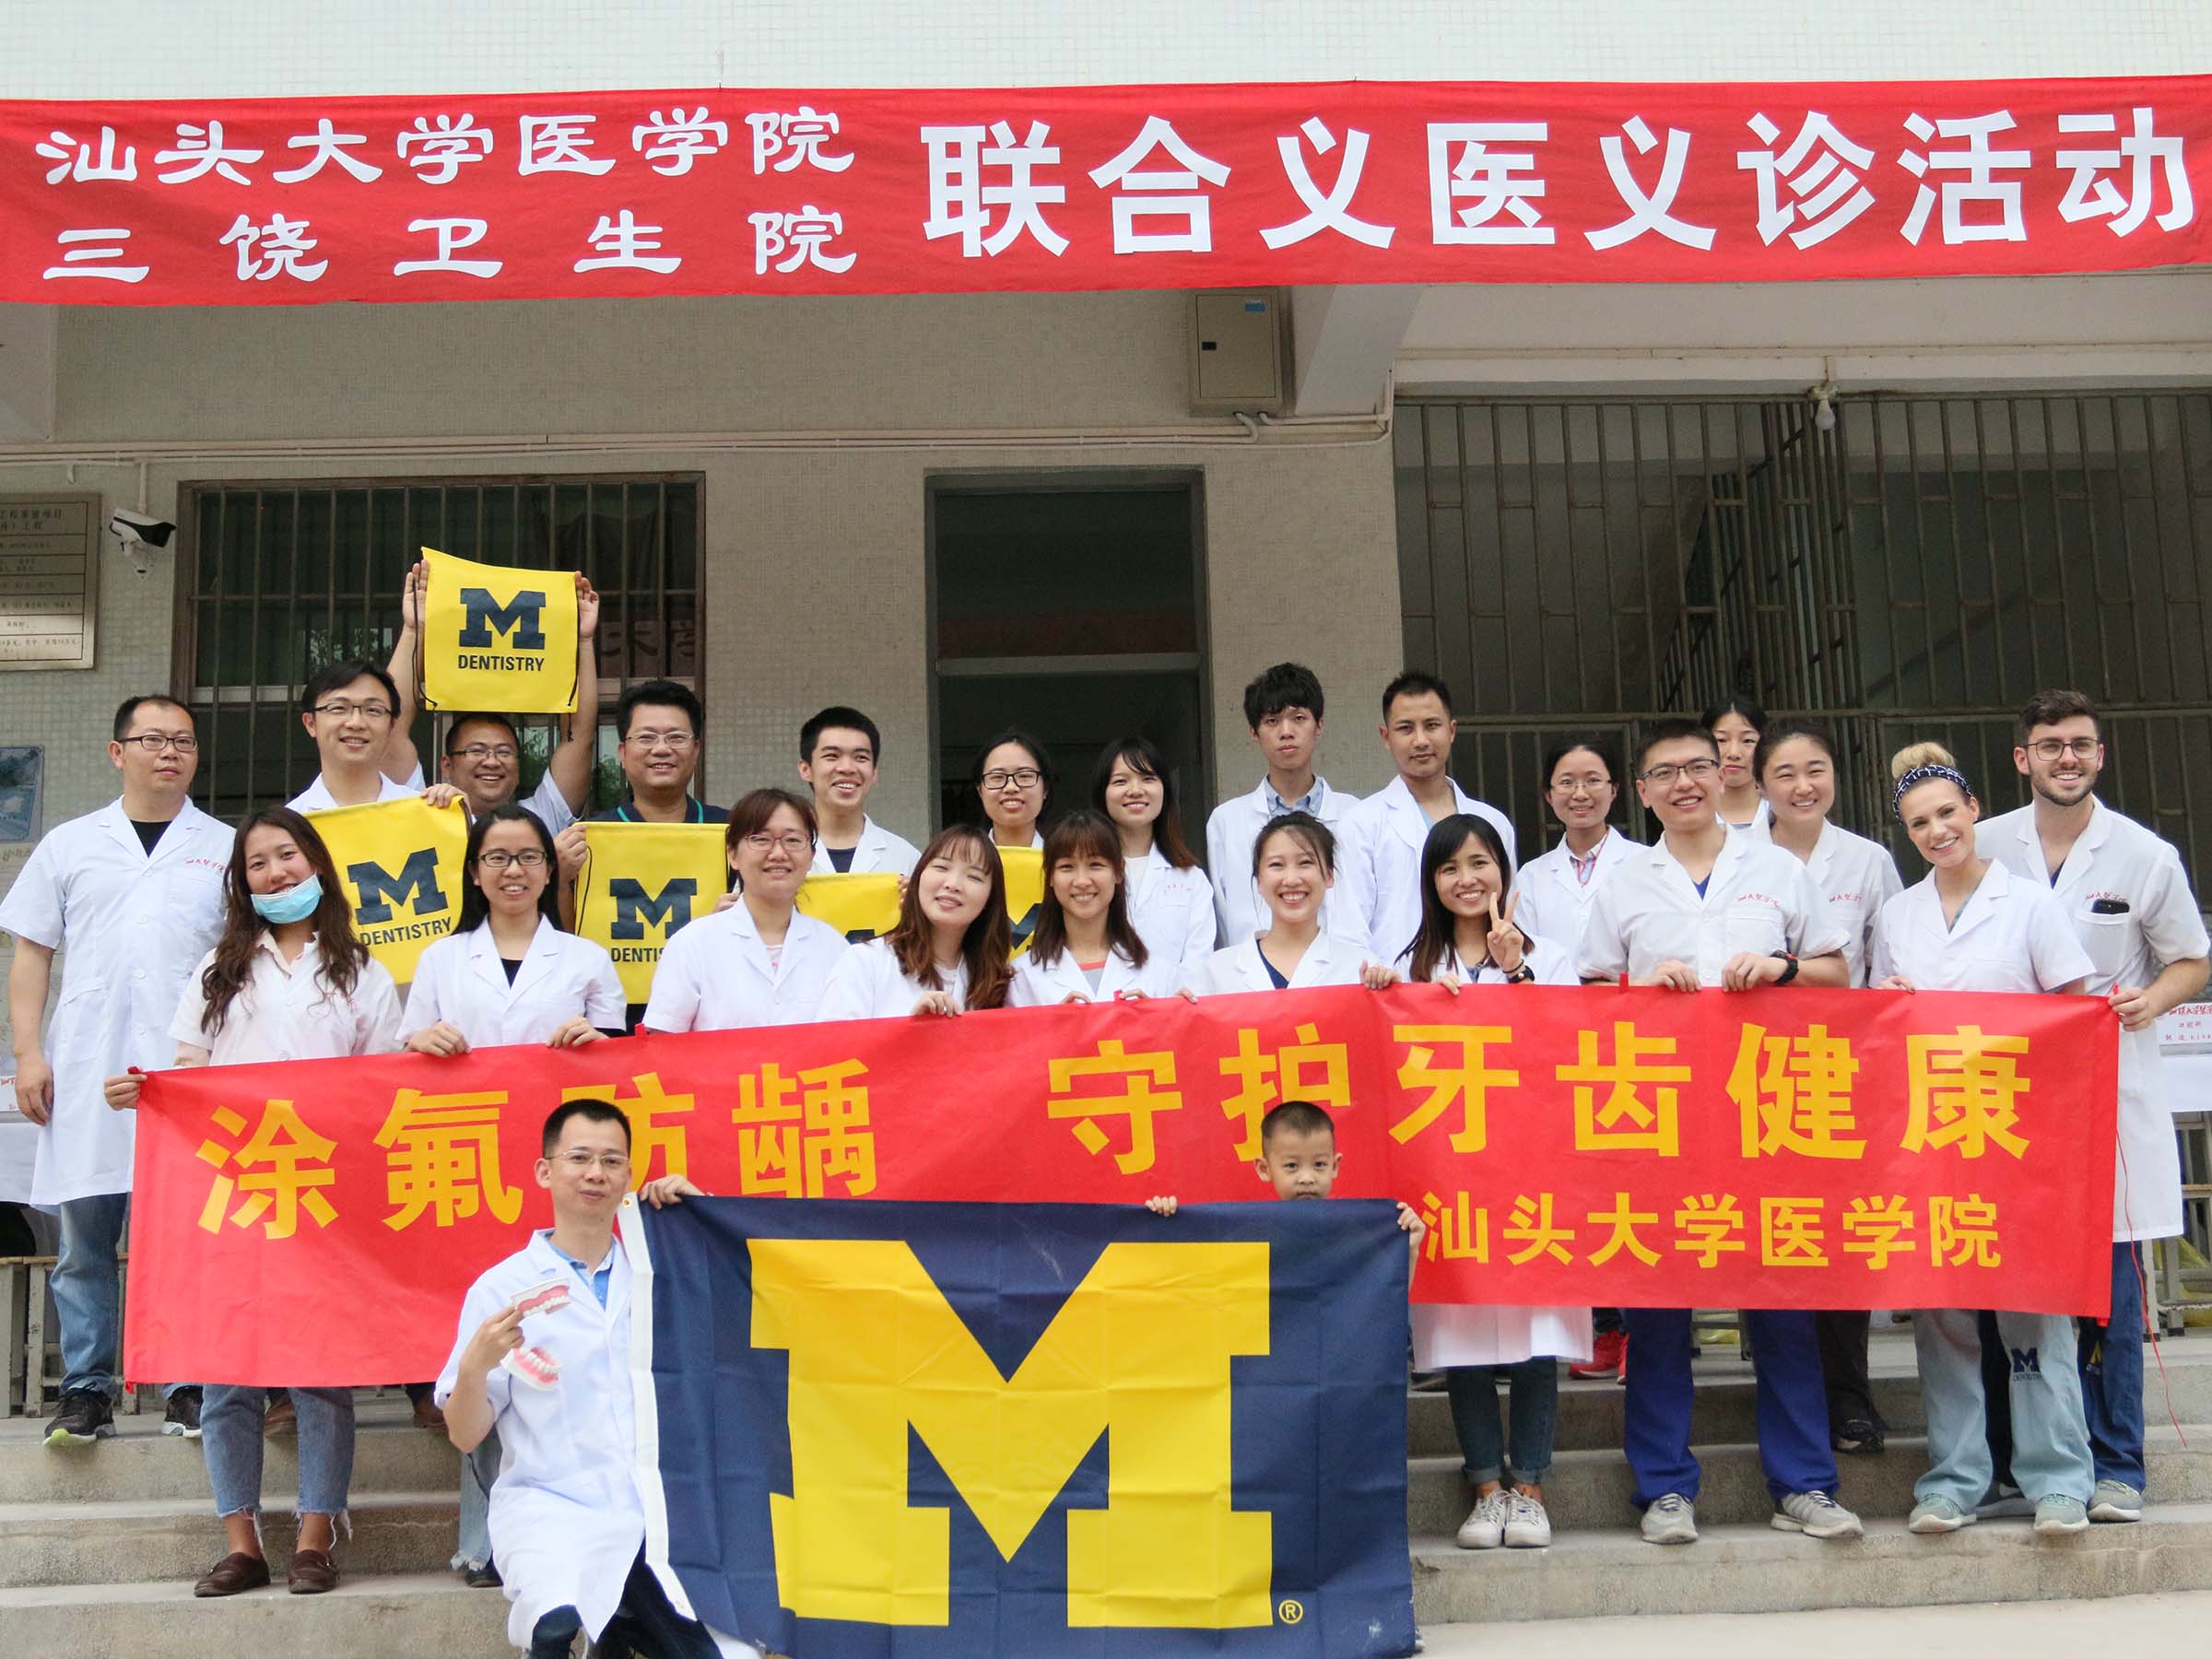 dental students in china